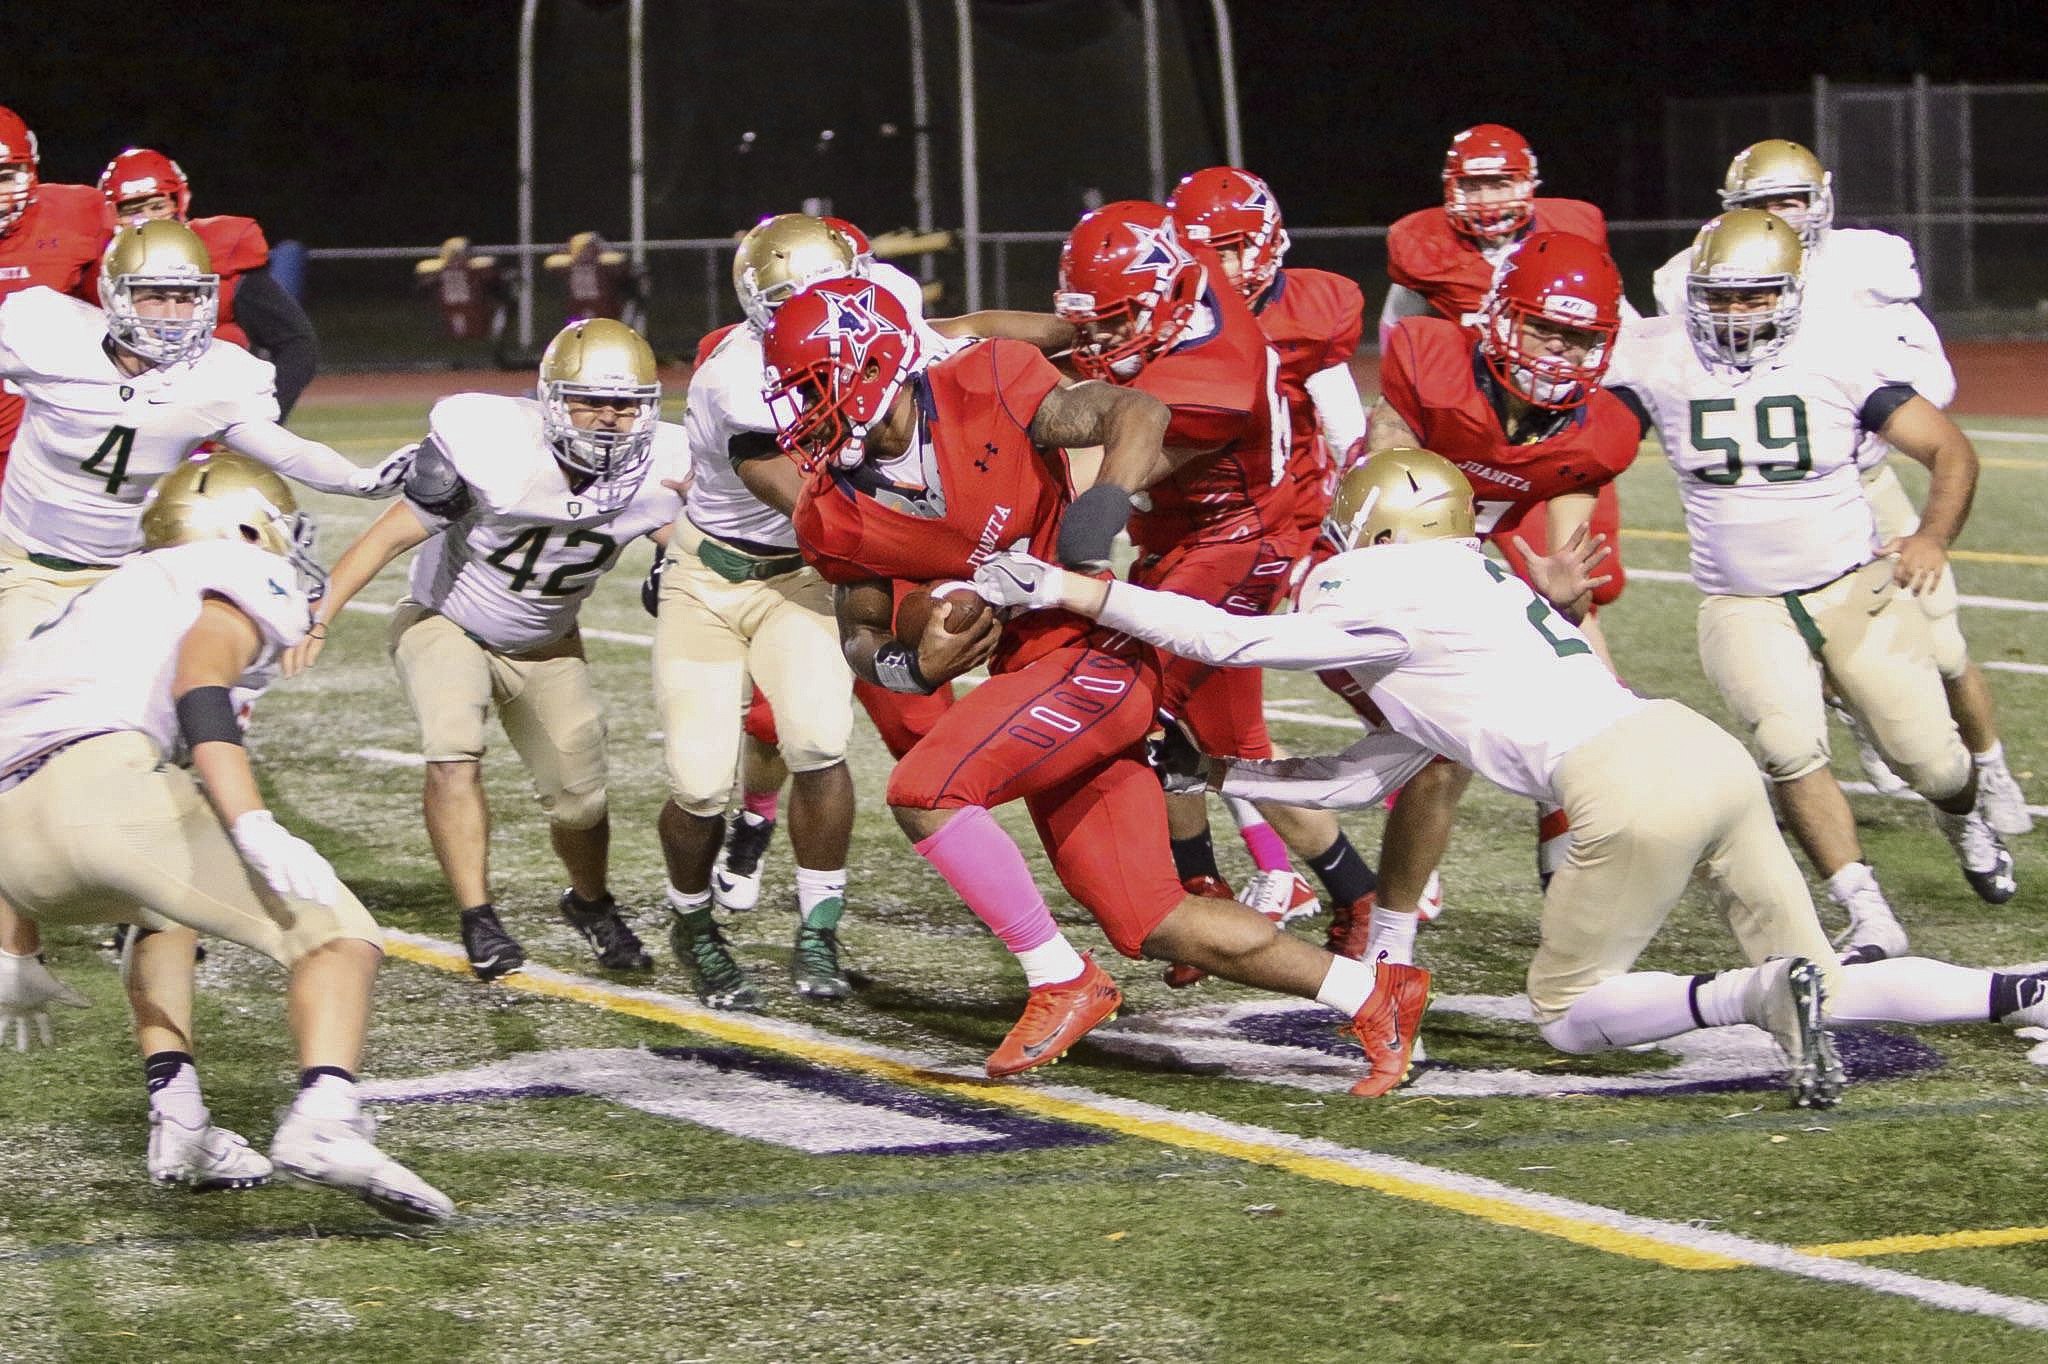 Juanita running back Salvon Ahmed drags a Redmond defender during the Rebels' 36-3 win on Friday at Bergh Field in Kirkland. Ahmed rushed for 264 yards and scored four touchdowns. Photo courtesy of Joe Byrne.